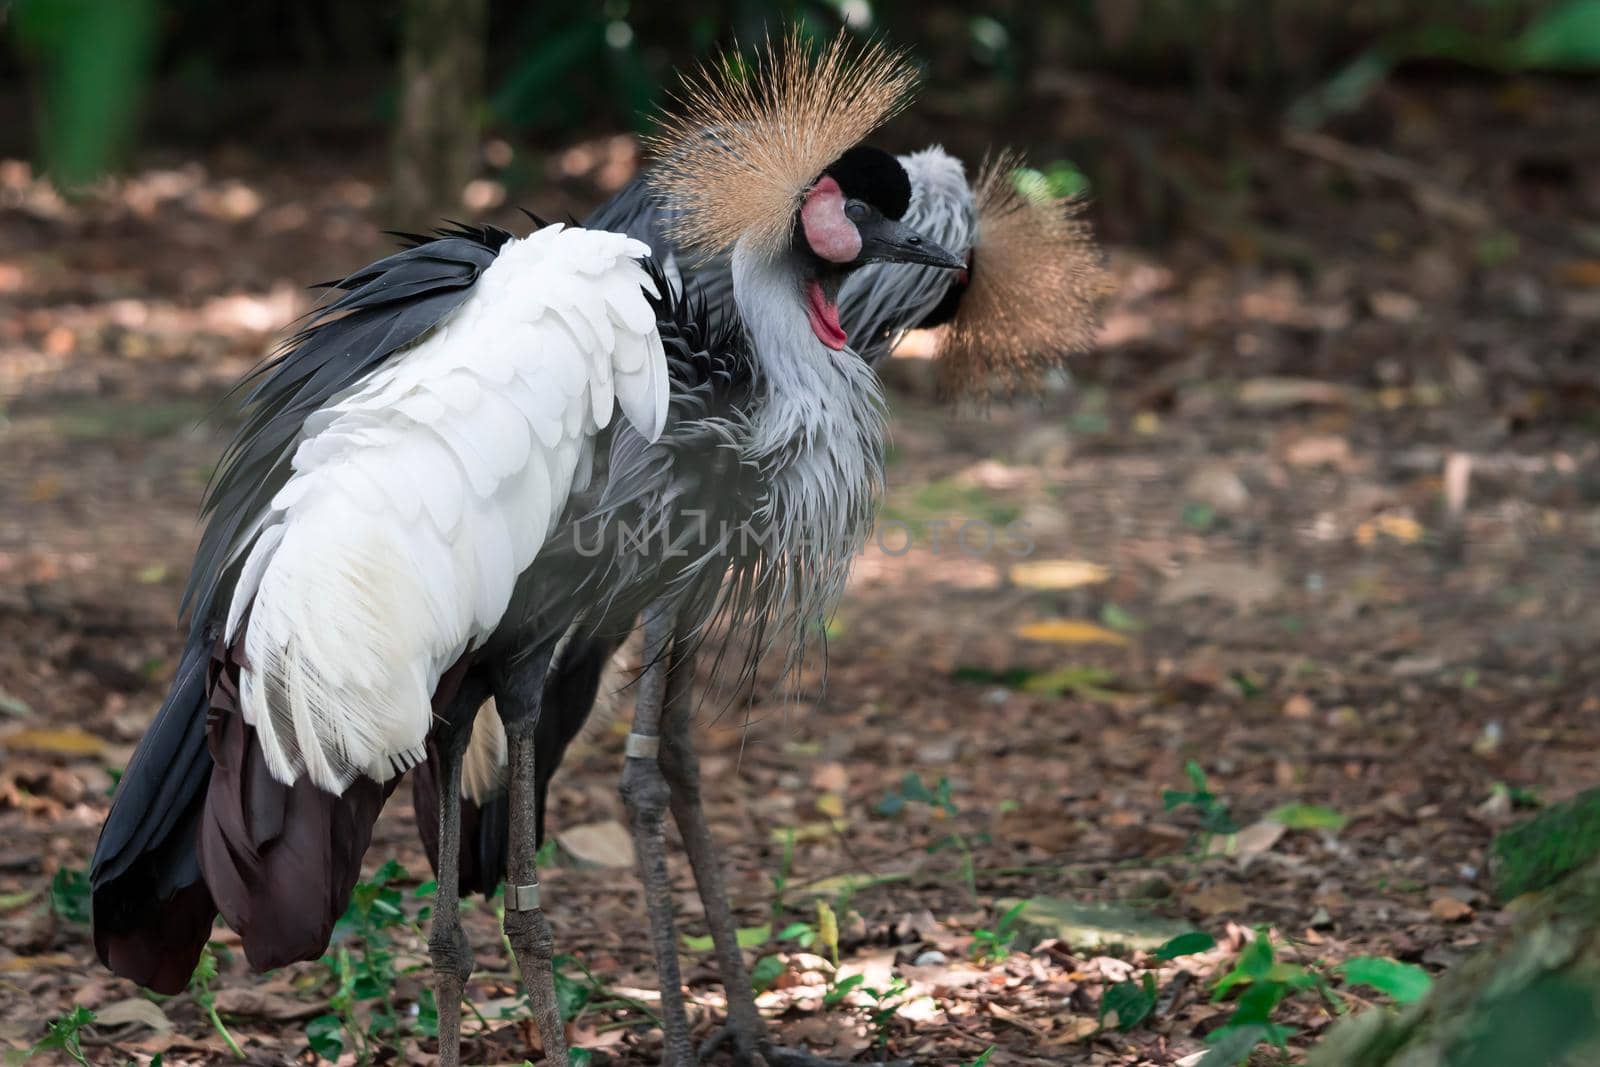 Grey crowned crane, also known as the African crowned crane, golden crested crane, golden crowned crane, East African crane, East African crowned crane, Eastern crowned crane, South African crane by billroque